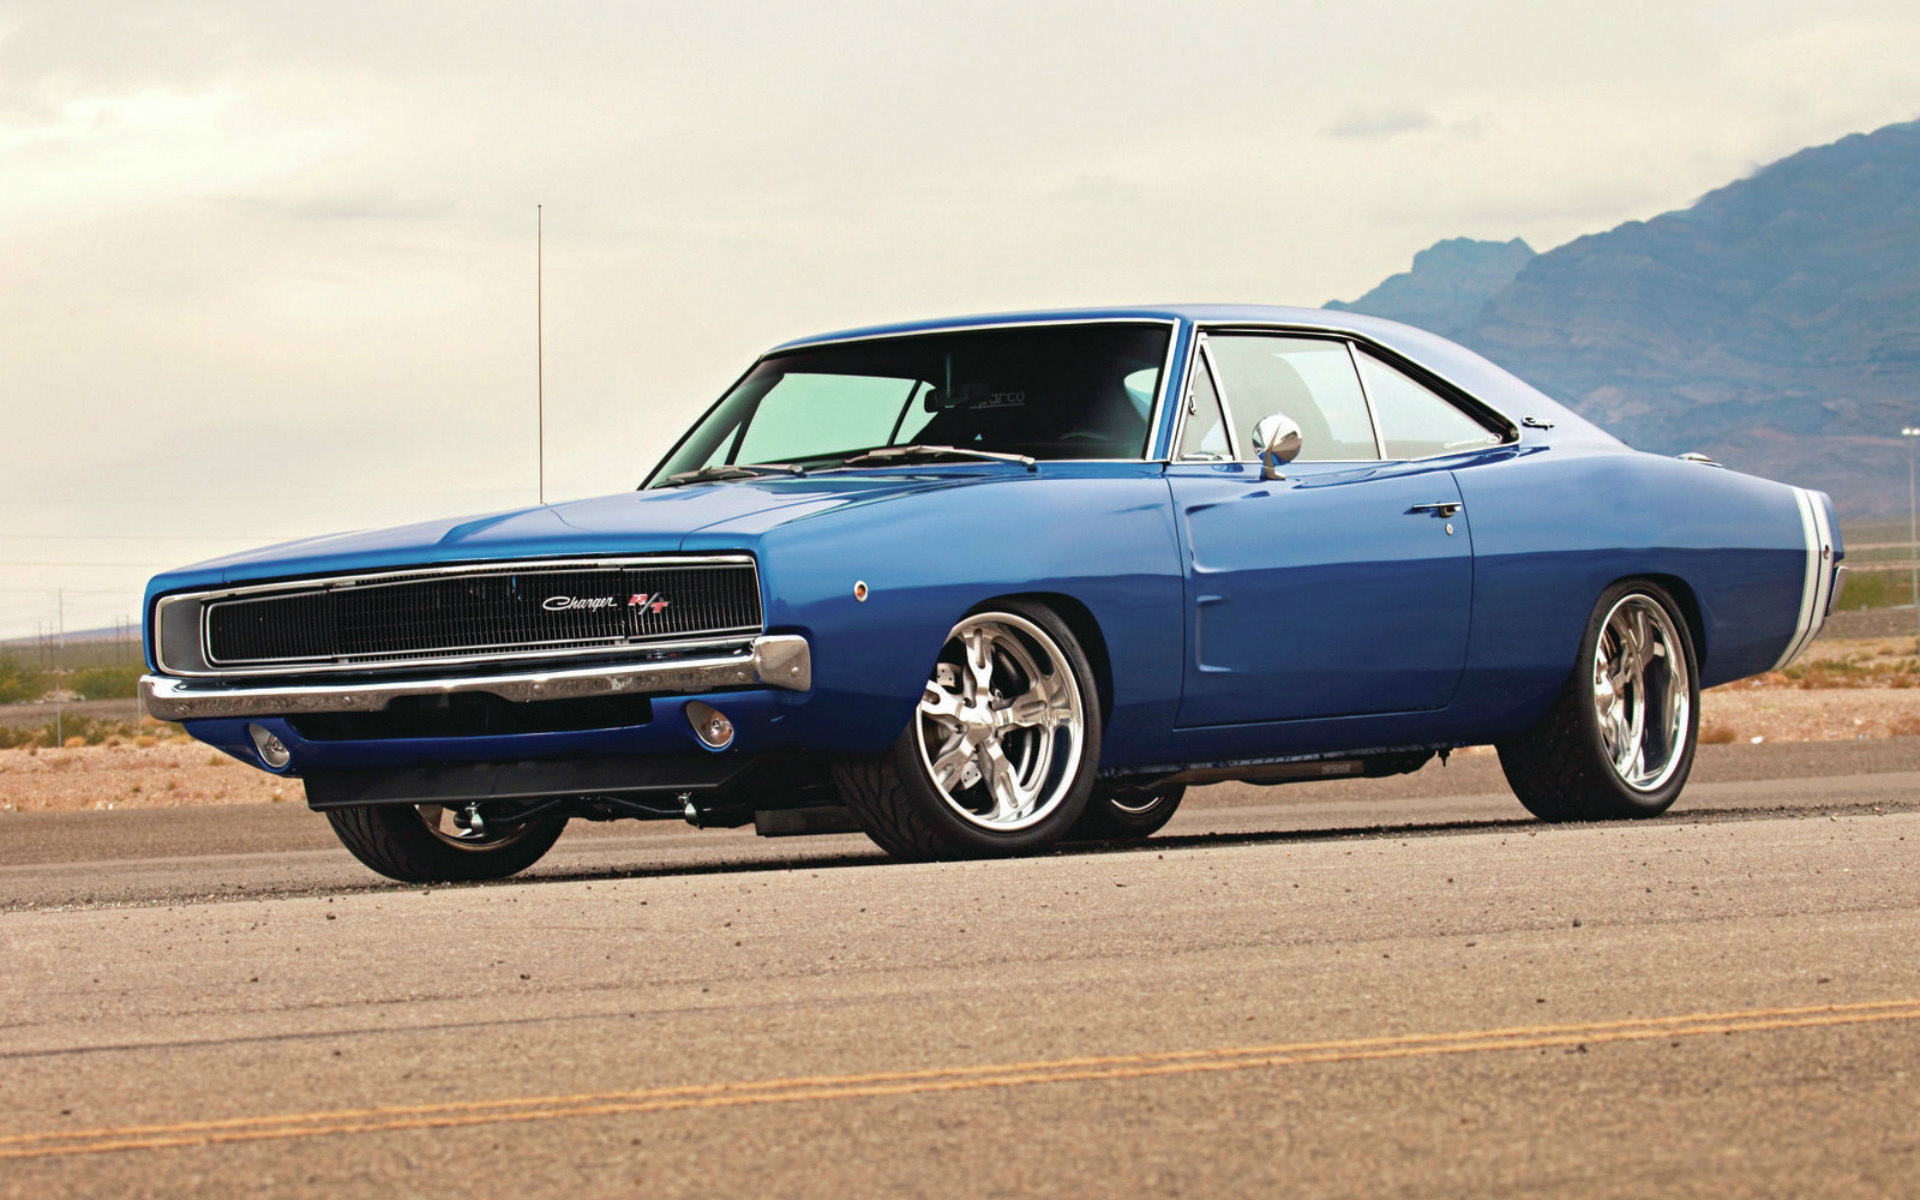  Dodge Charger HQ Background Images